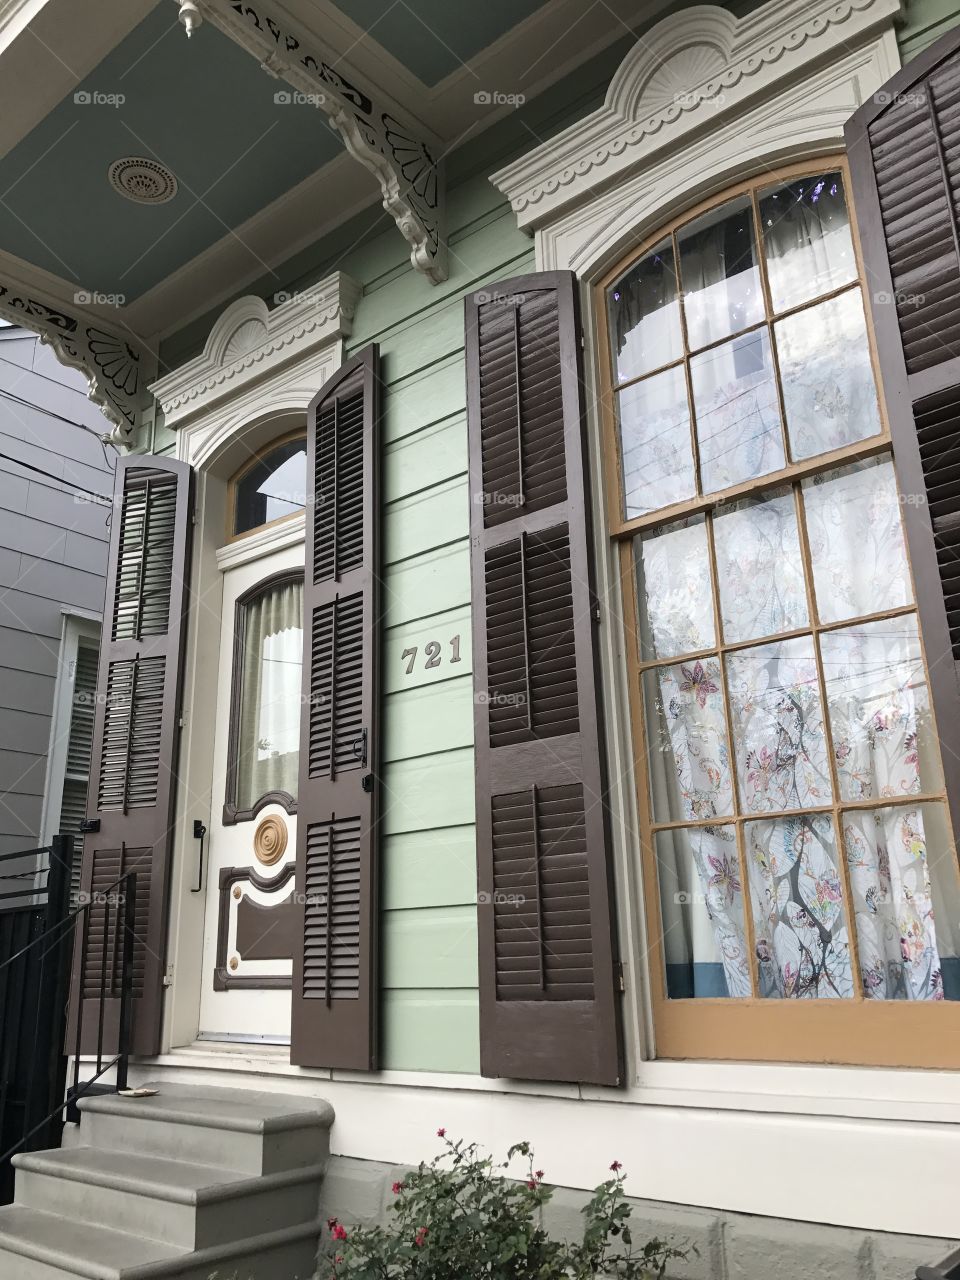 Perfect color scheme in the French Quarter.